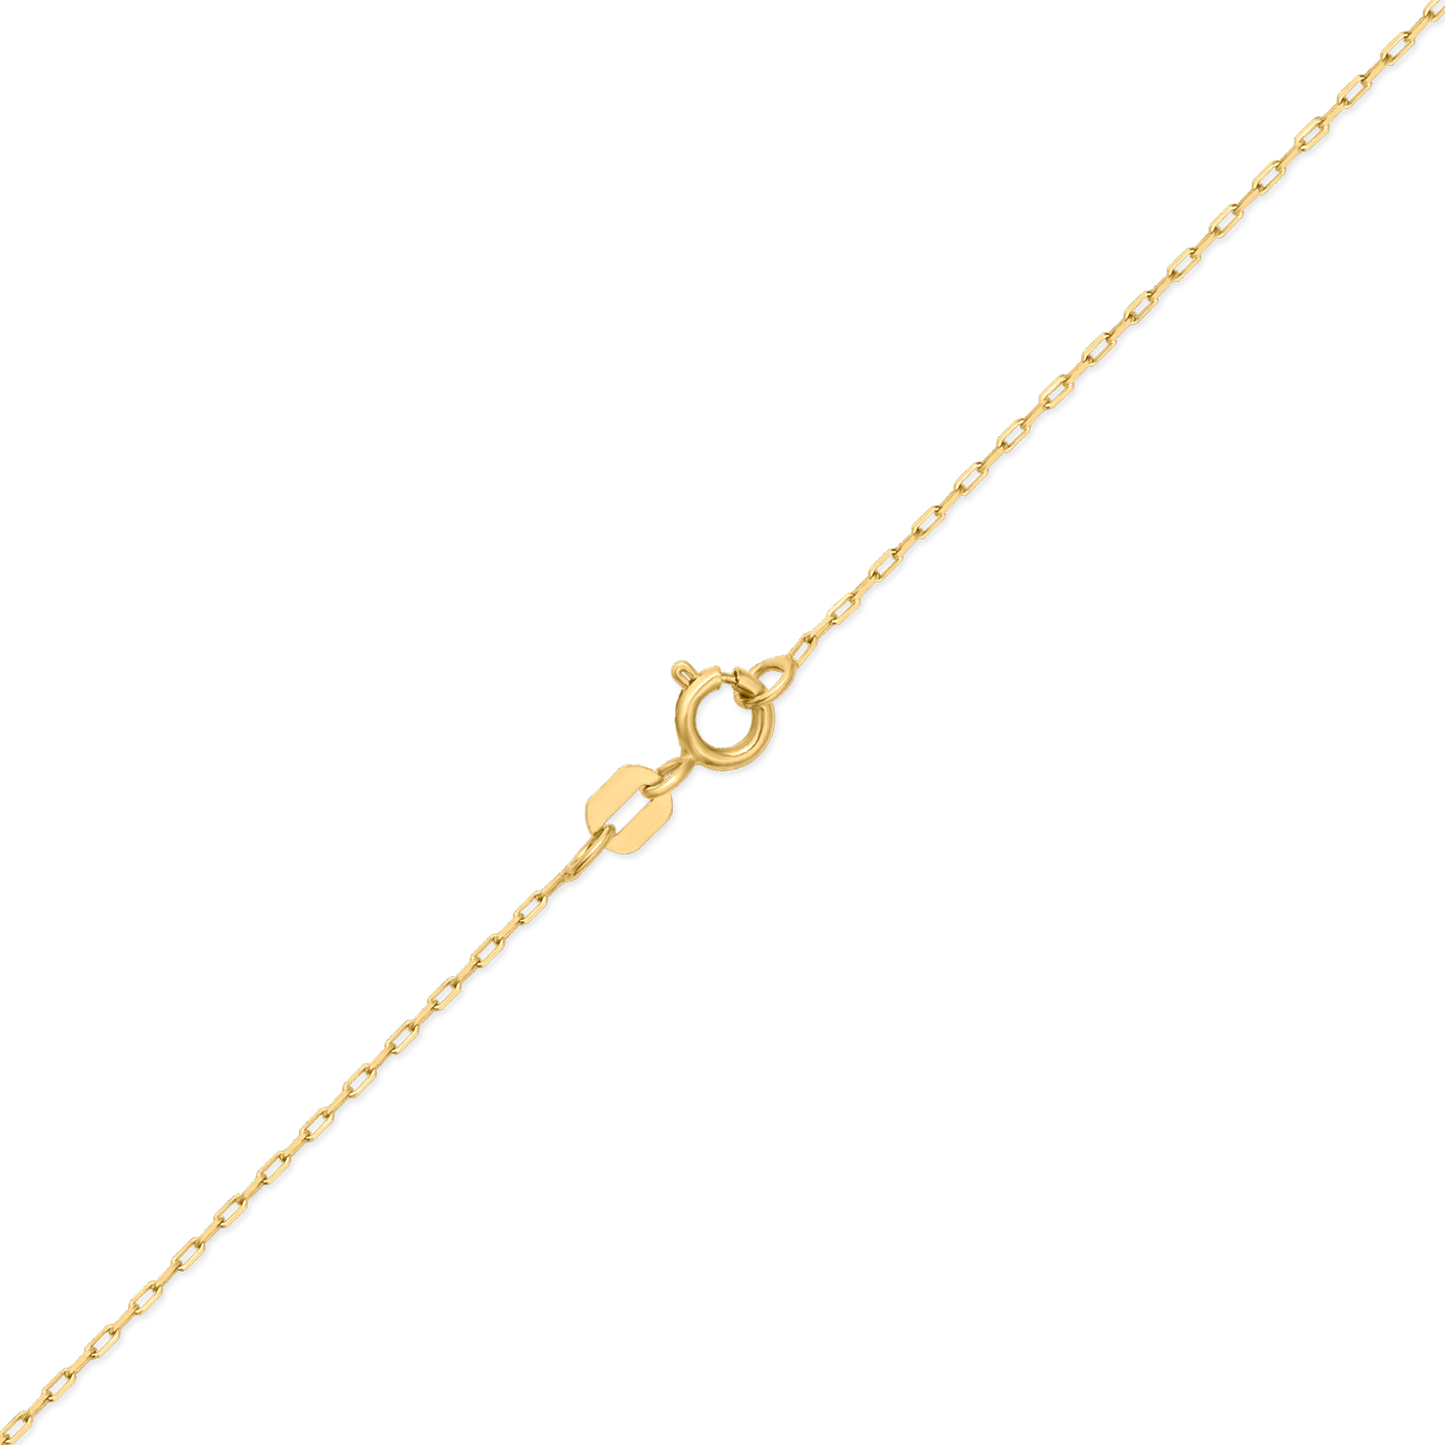 18K Yellow Gold Thin Cable Chain